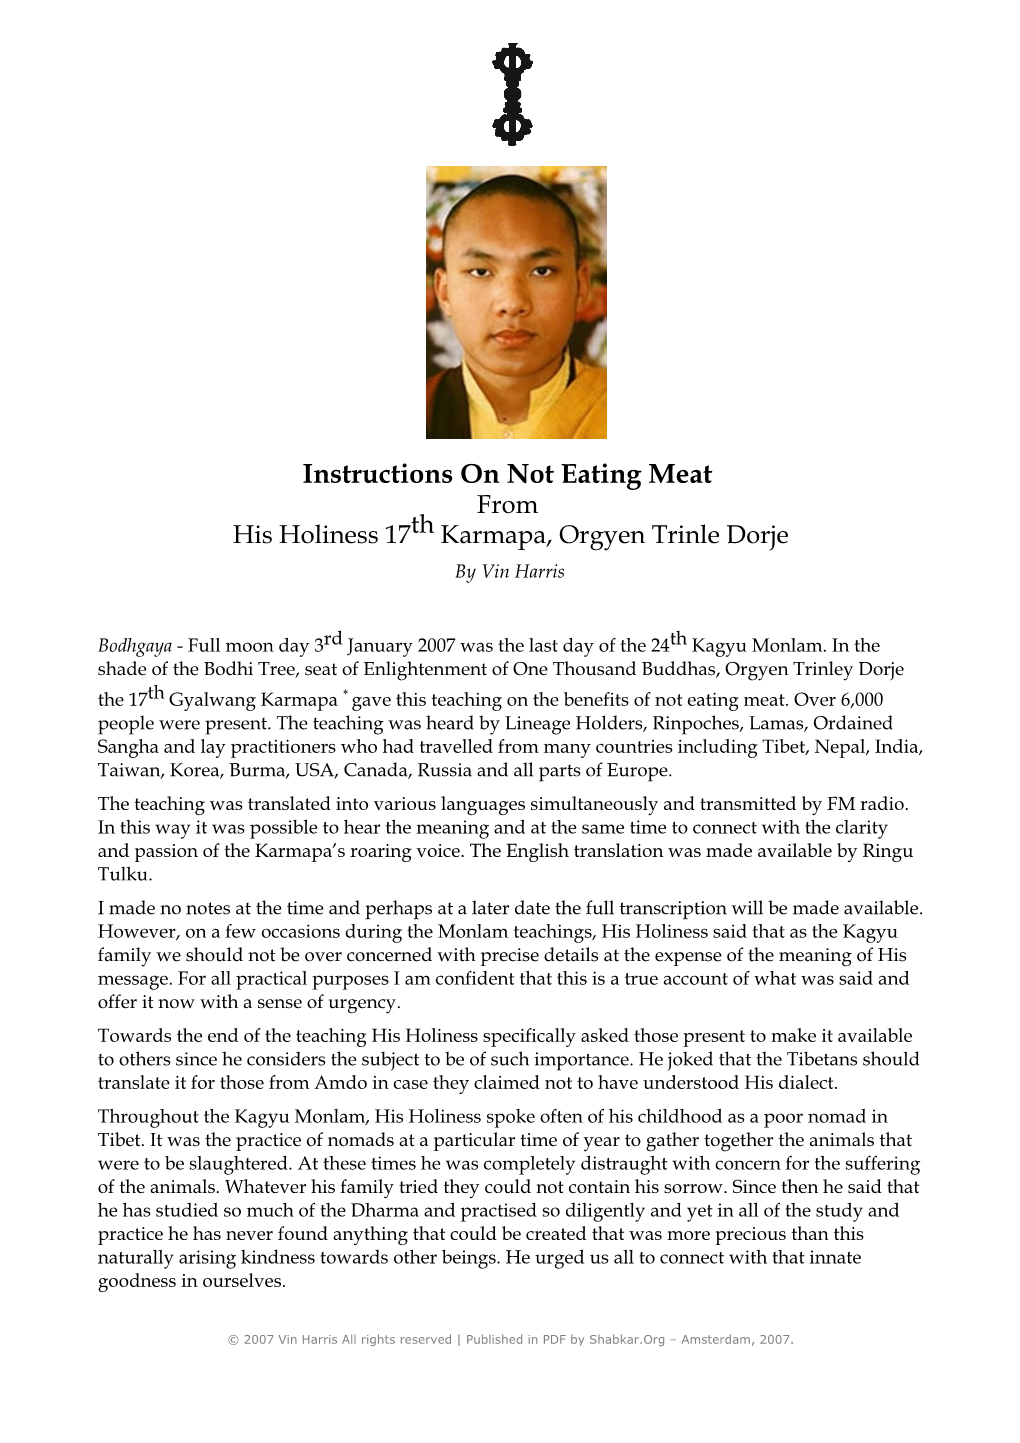 Instructions on Not Eating Meat from His Holiness 17Th Karmapa, Orgyen Trinle Dorje by Vin Harris